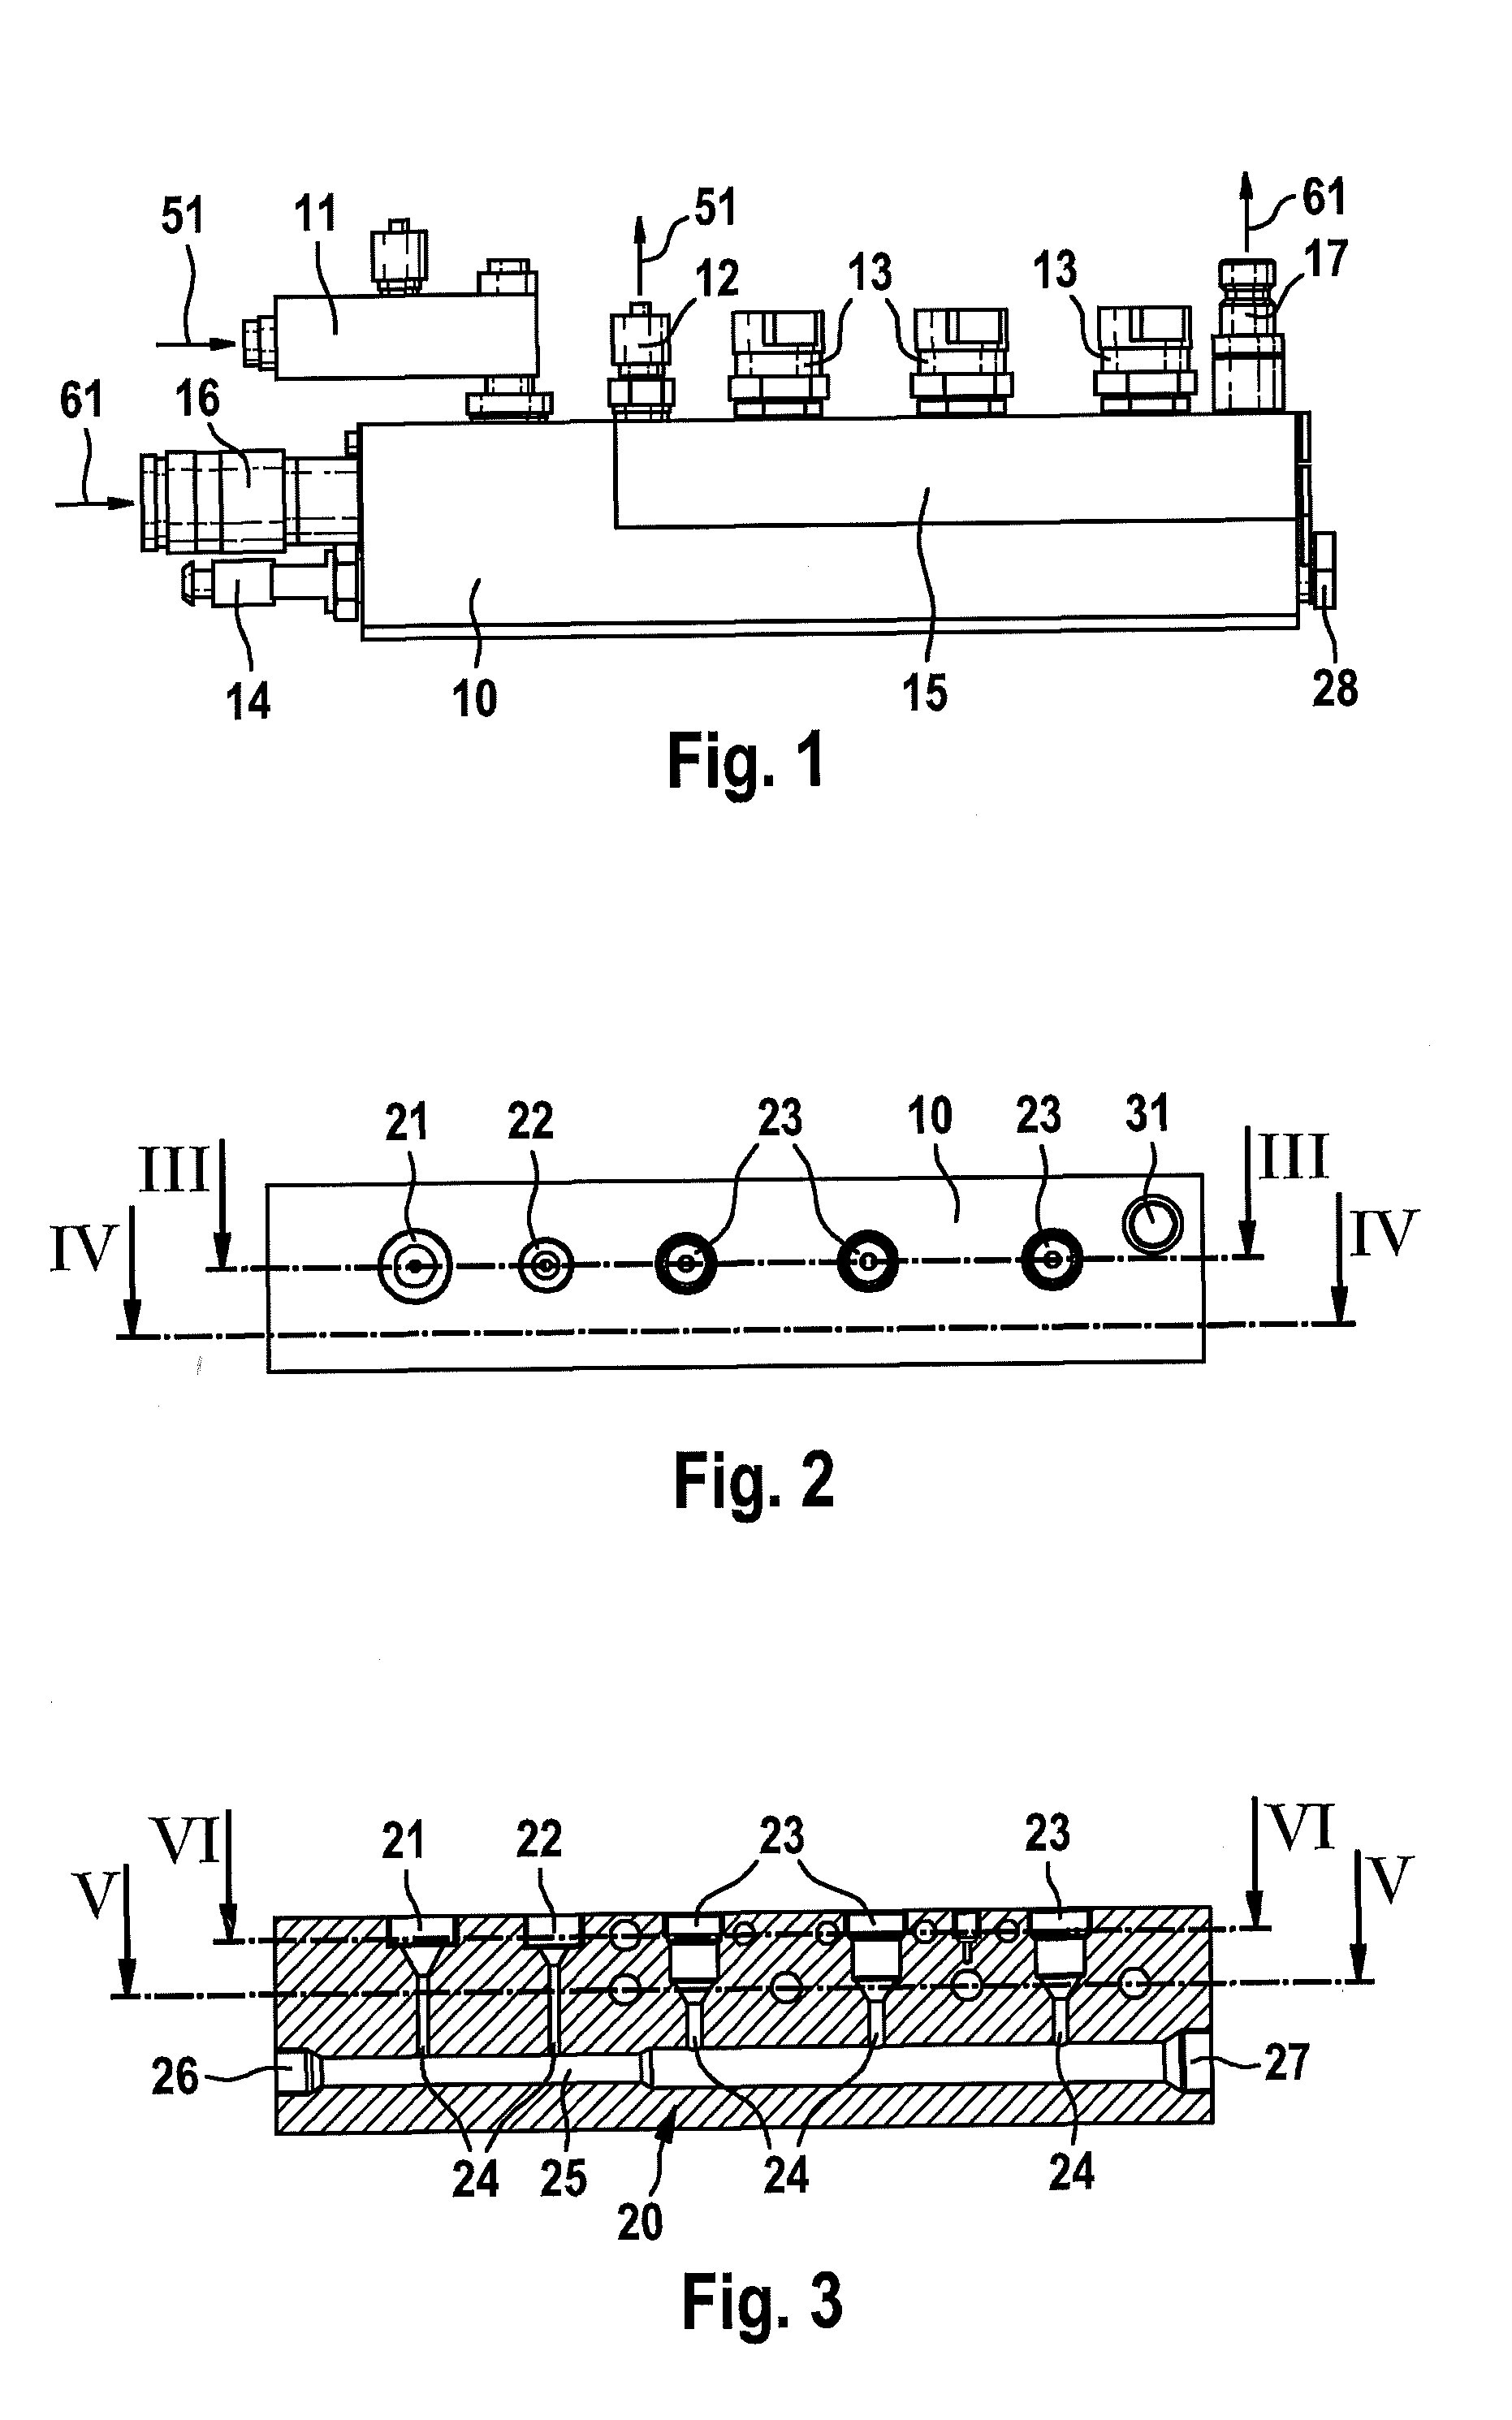 Fuel accumulator block for testing high-pressure components of fuel injection systems